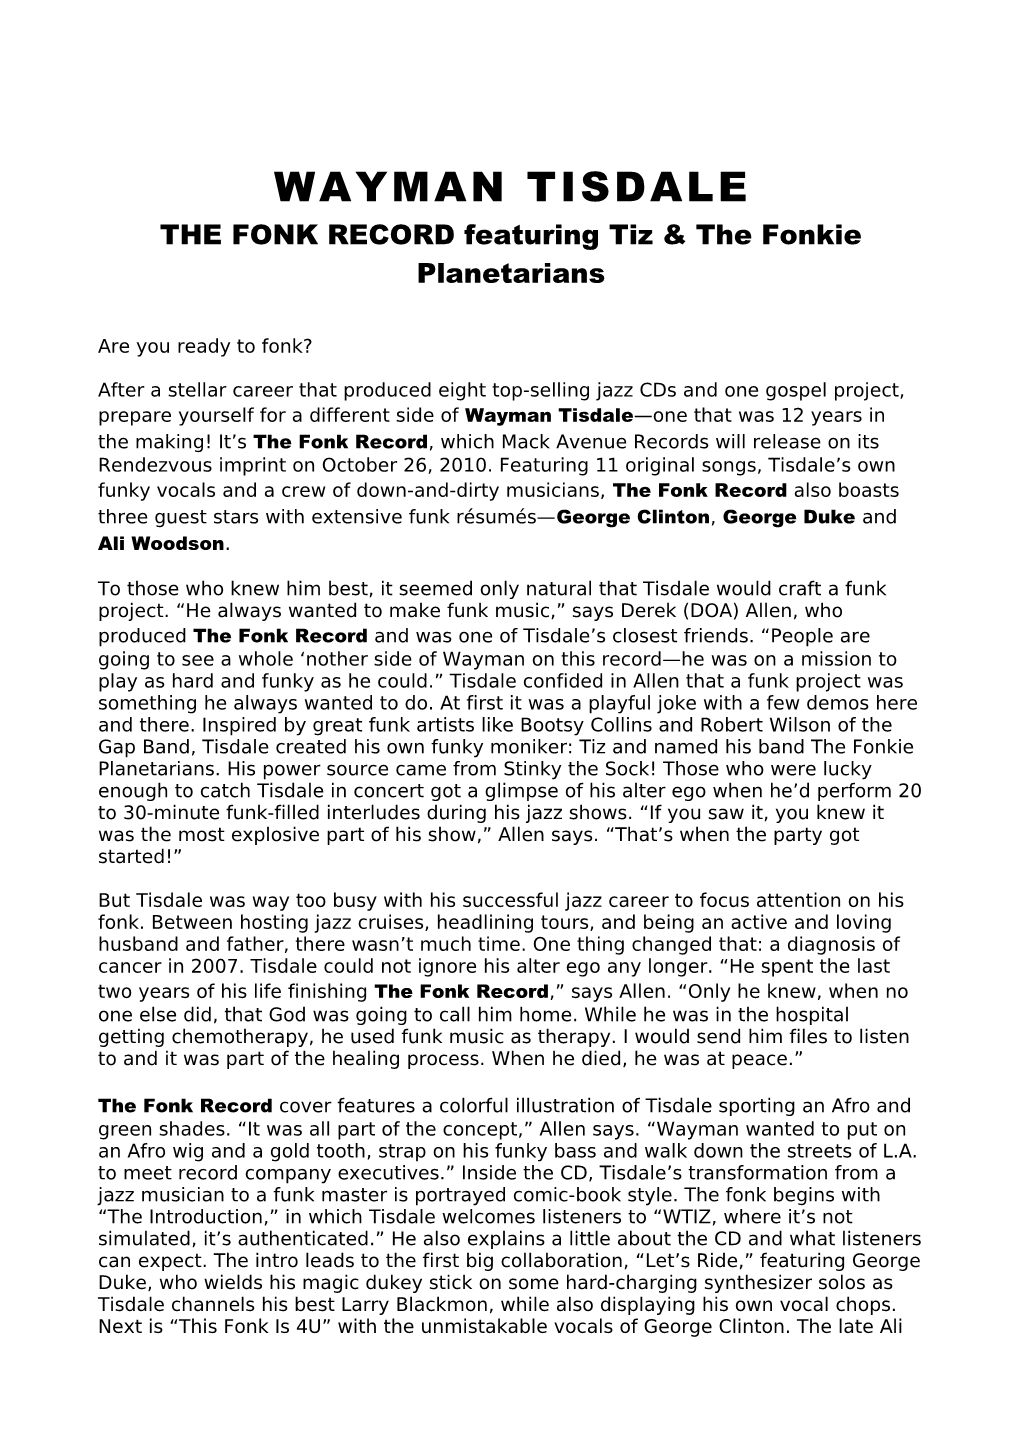 THE FONK RECORD Featuring Tiz & the Fonkie Planetarians